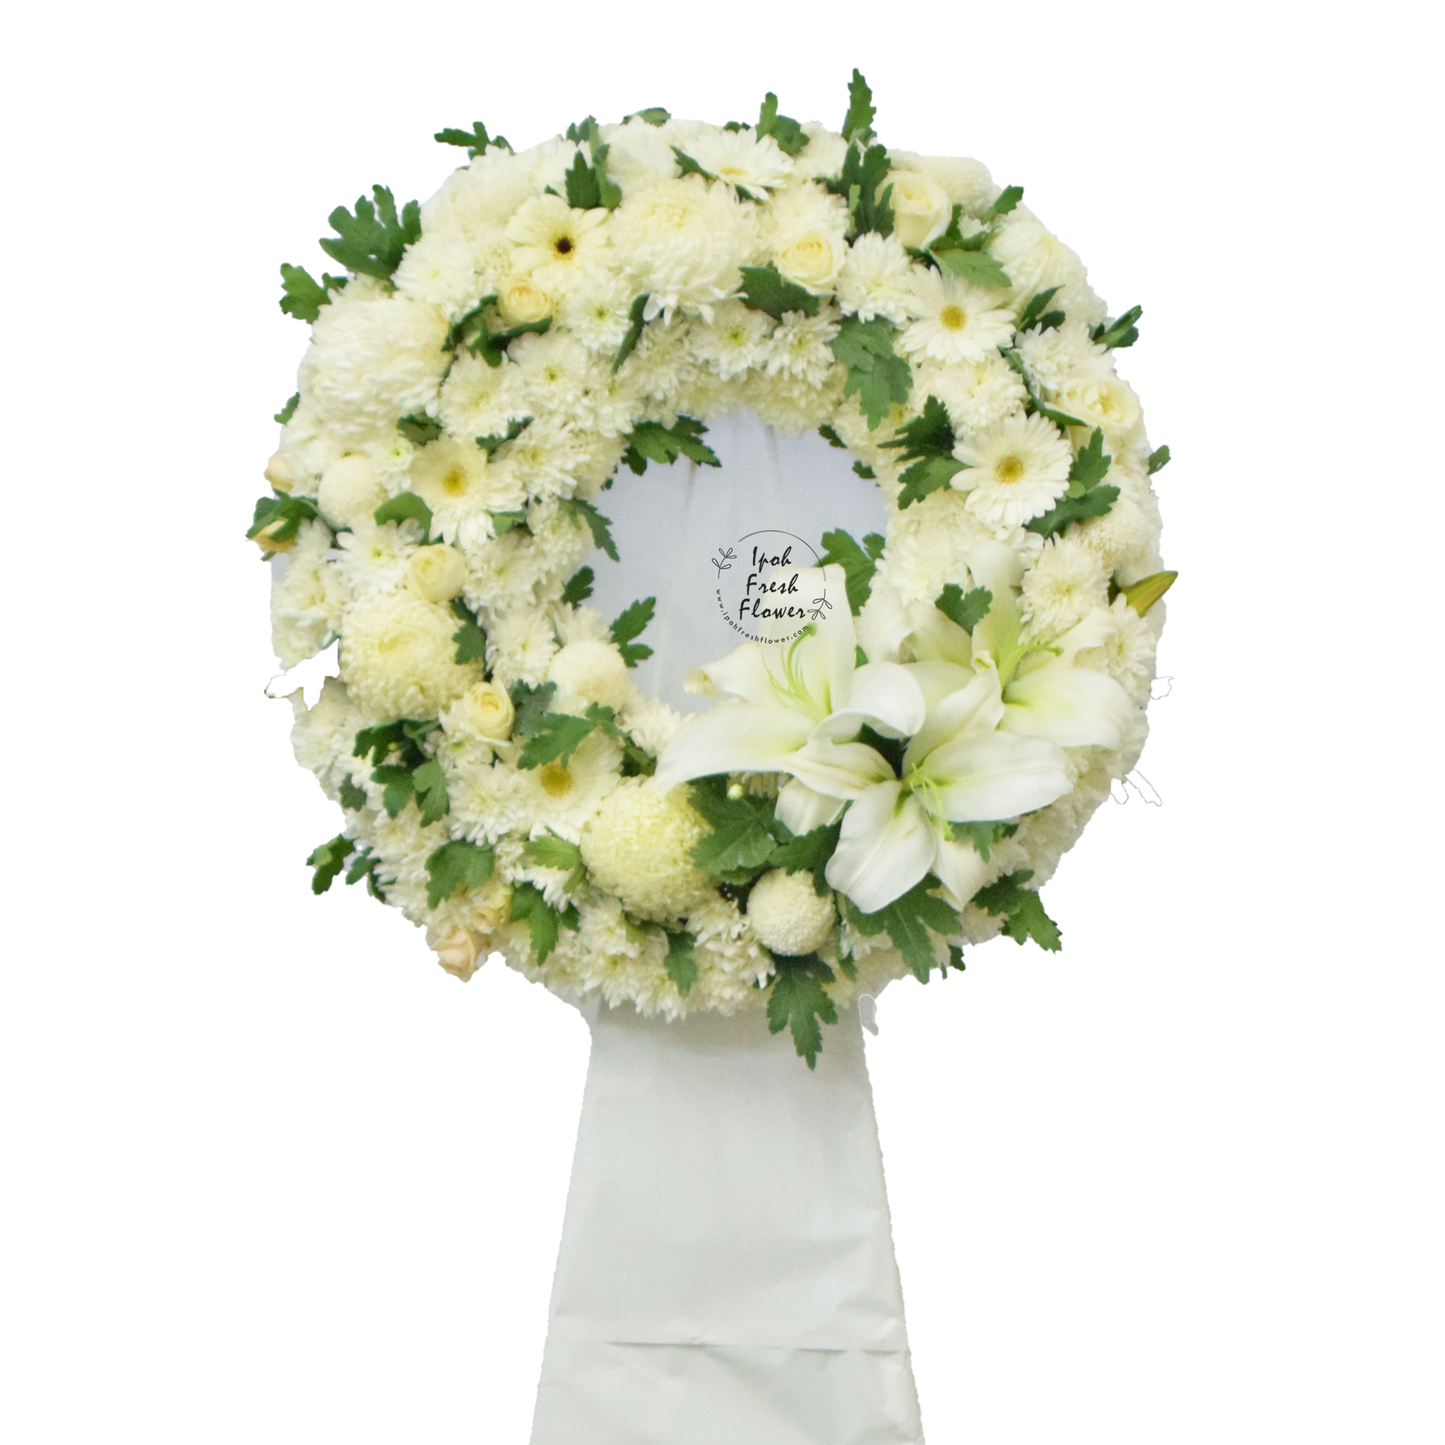 Condolence Wreaths & Funeral Flower Stand A5